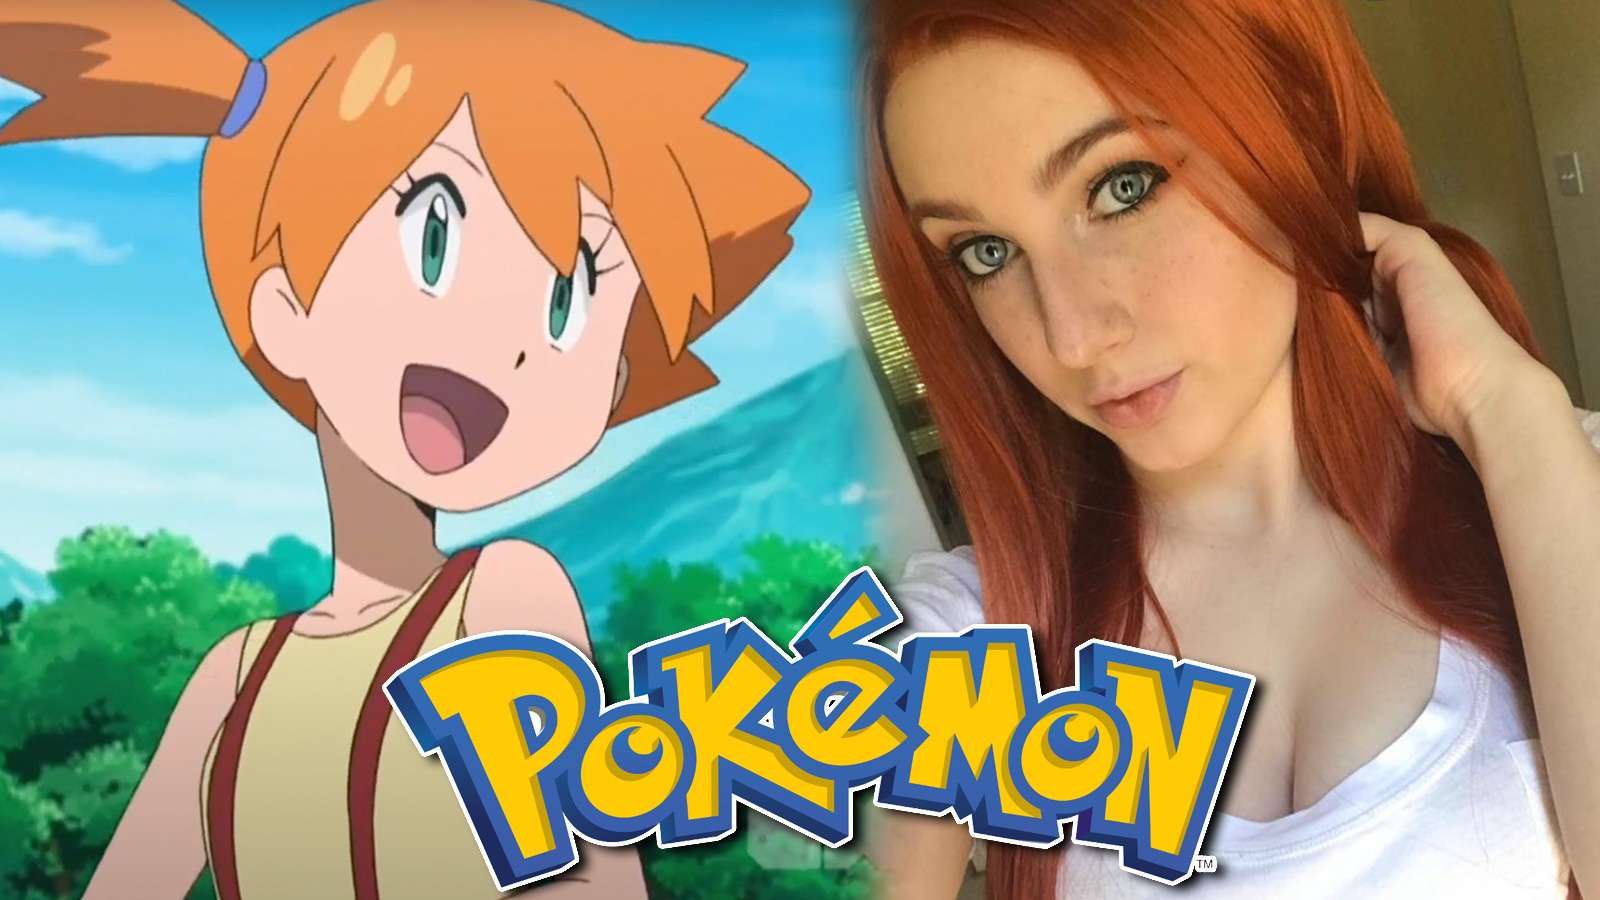 Screenshot of Misty in Pokemon anime next to a cosplayer.